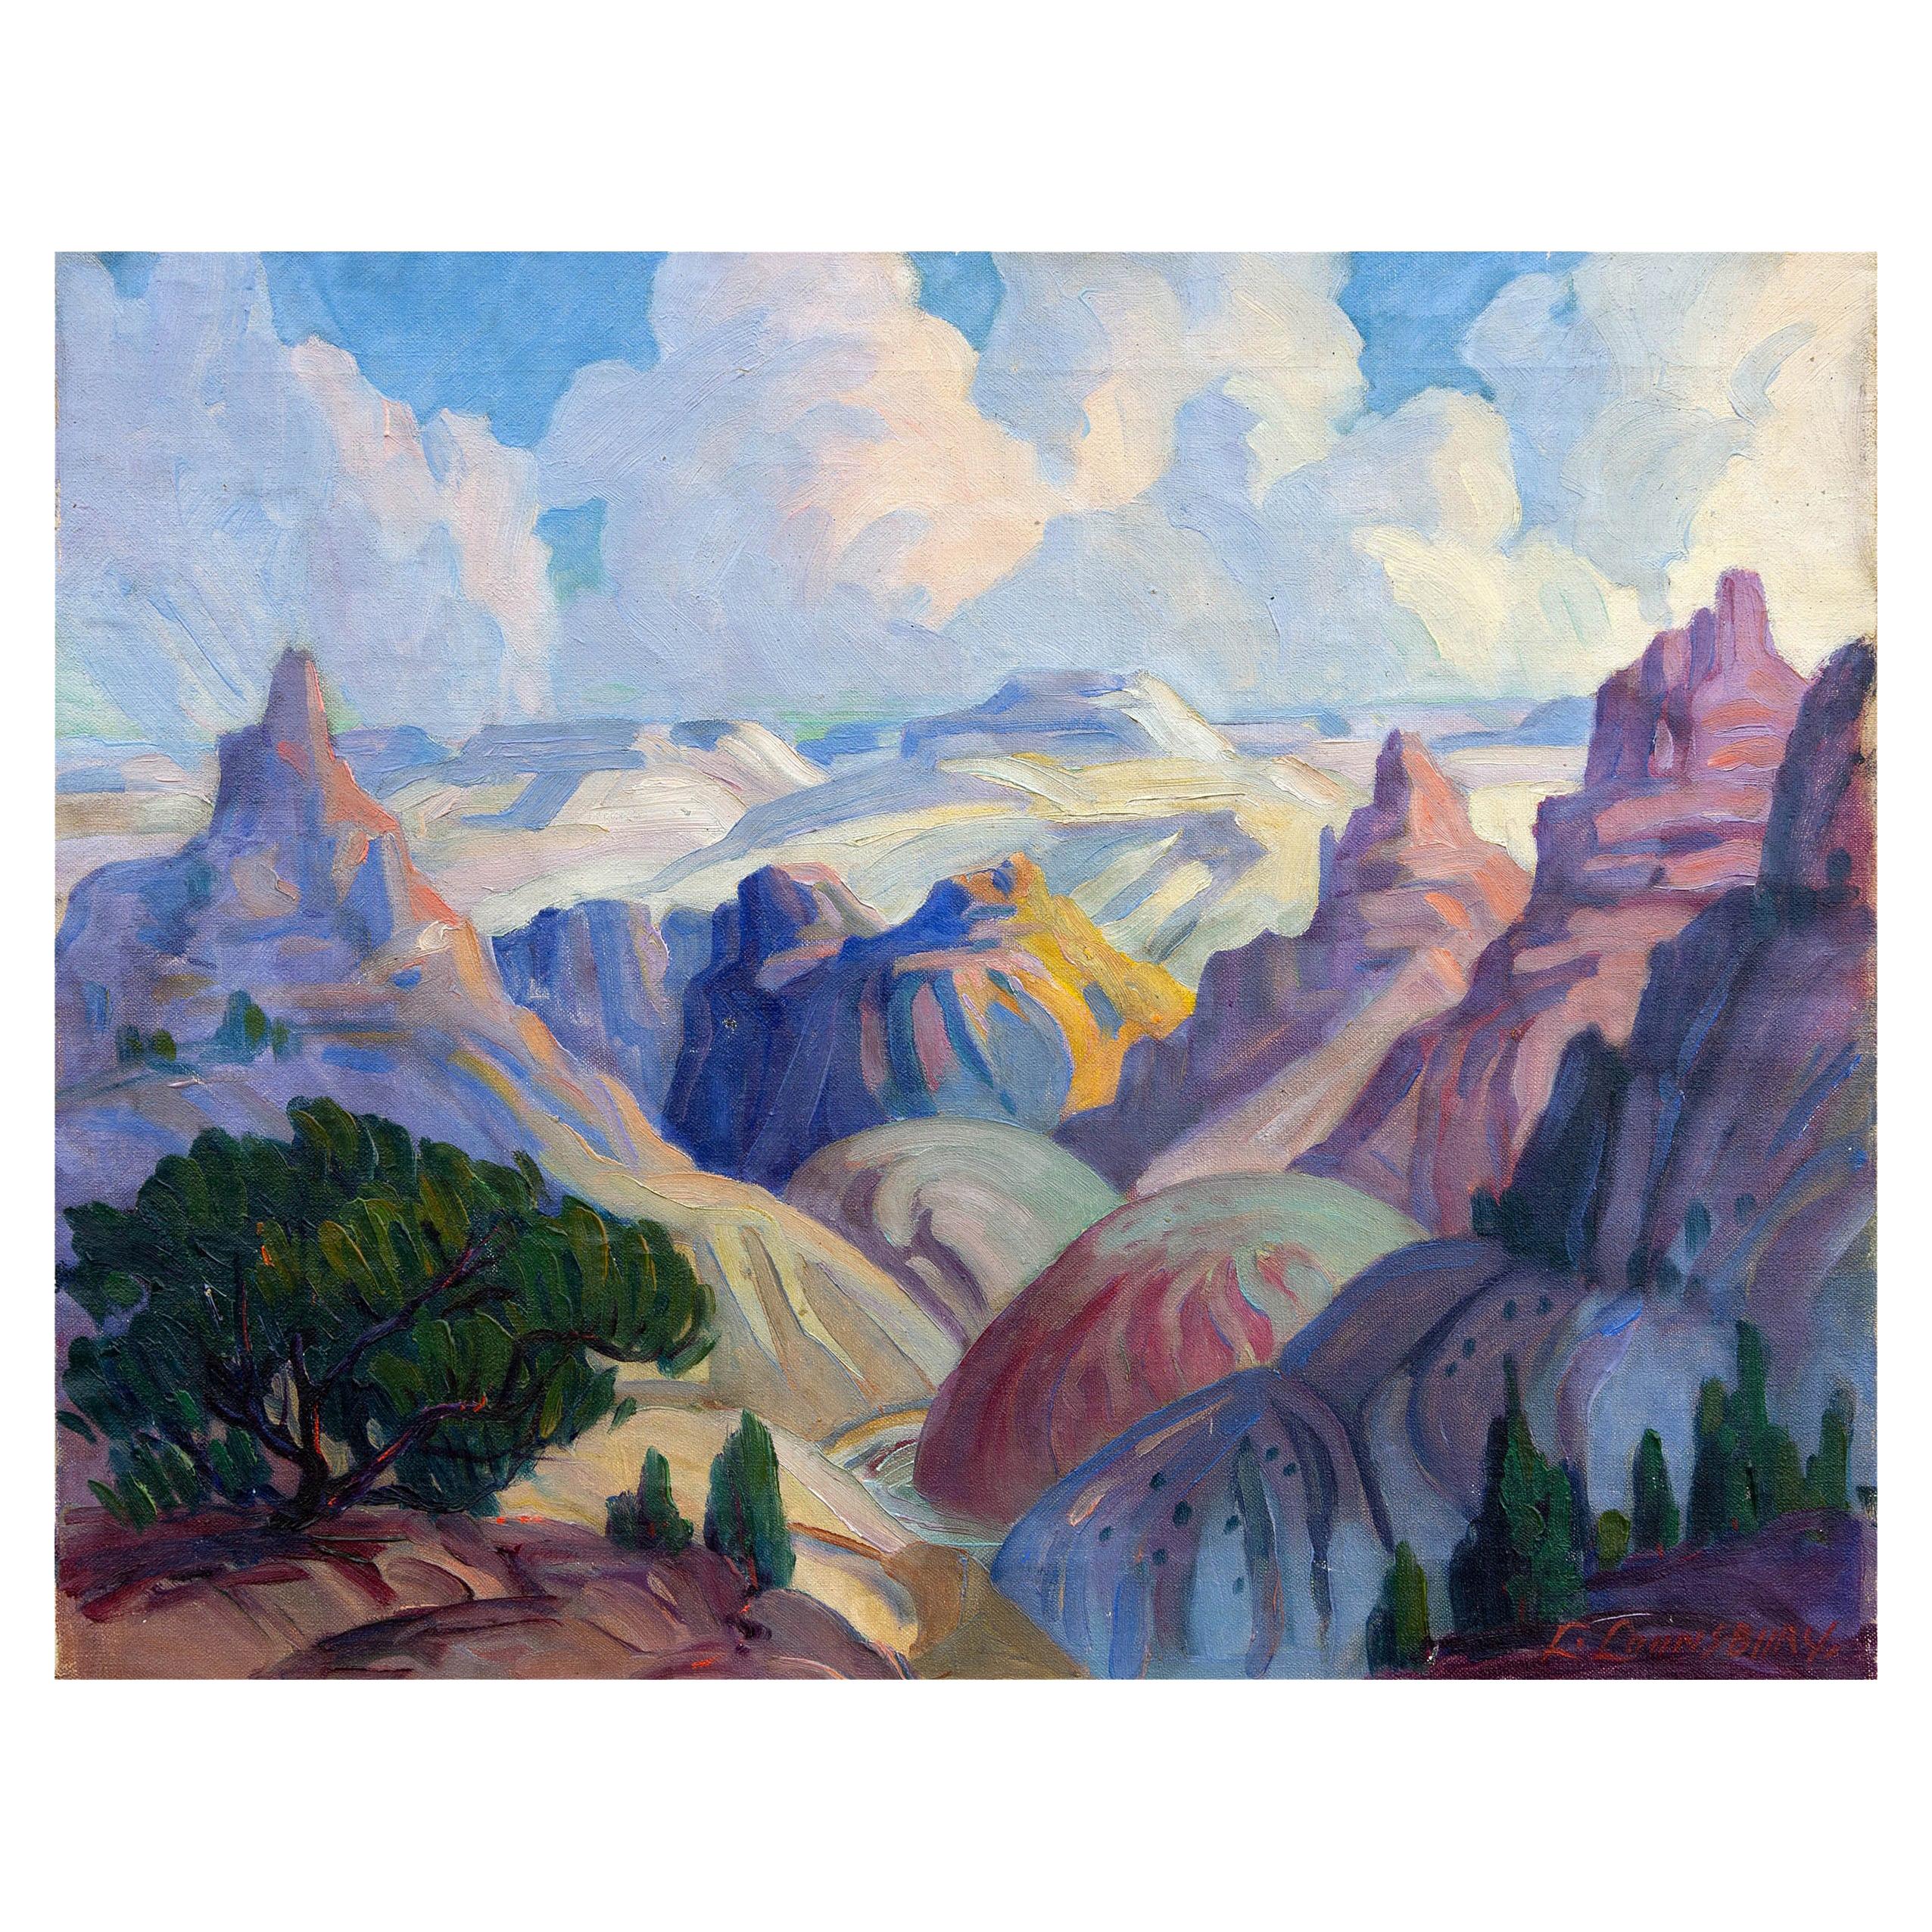 Grand Canyon Modernist Landscape Painting by Leslie Lounsbury, circa 1940s